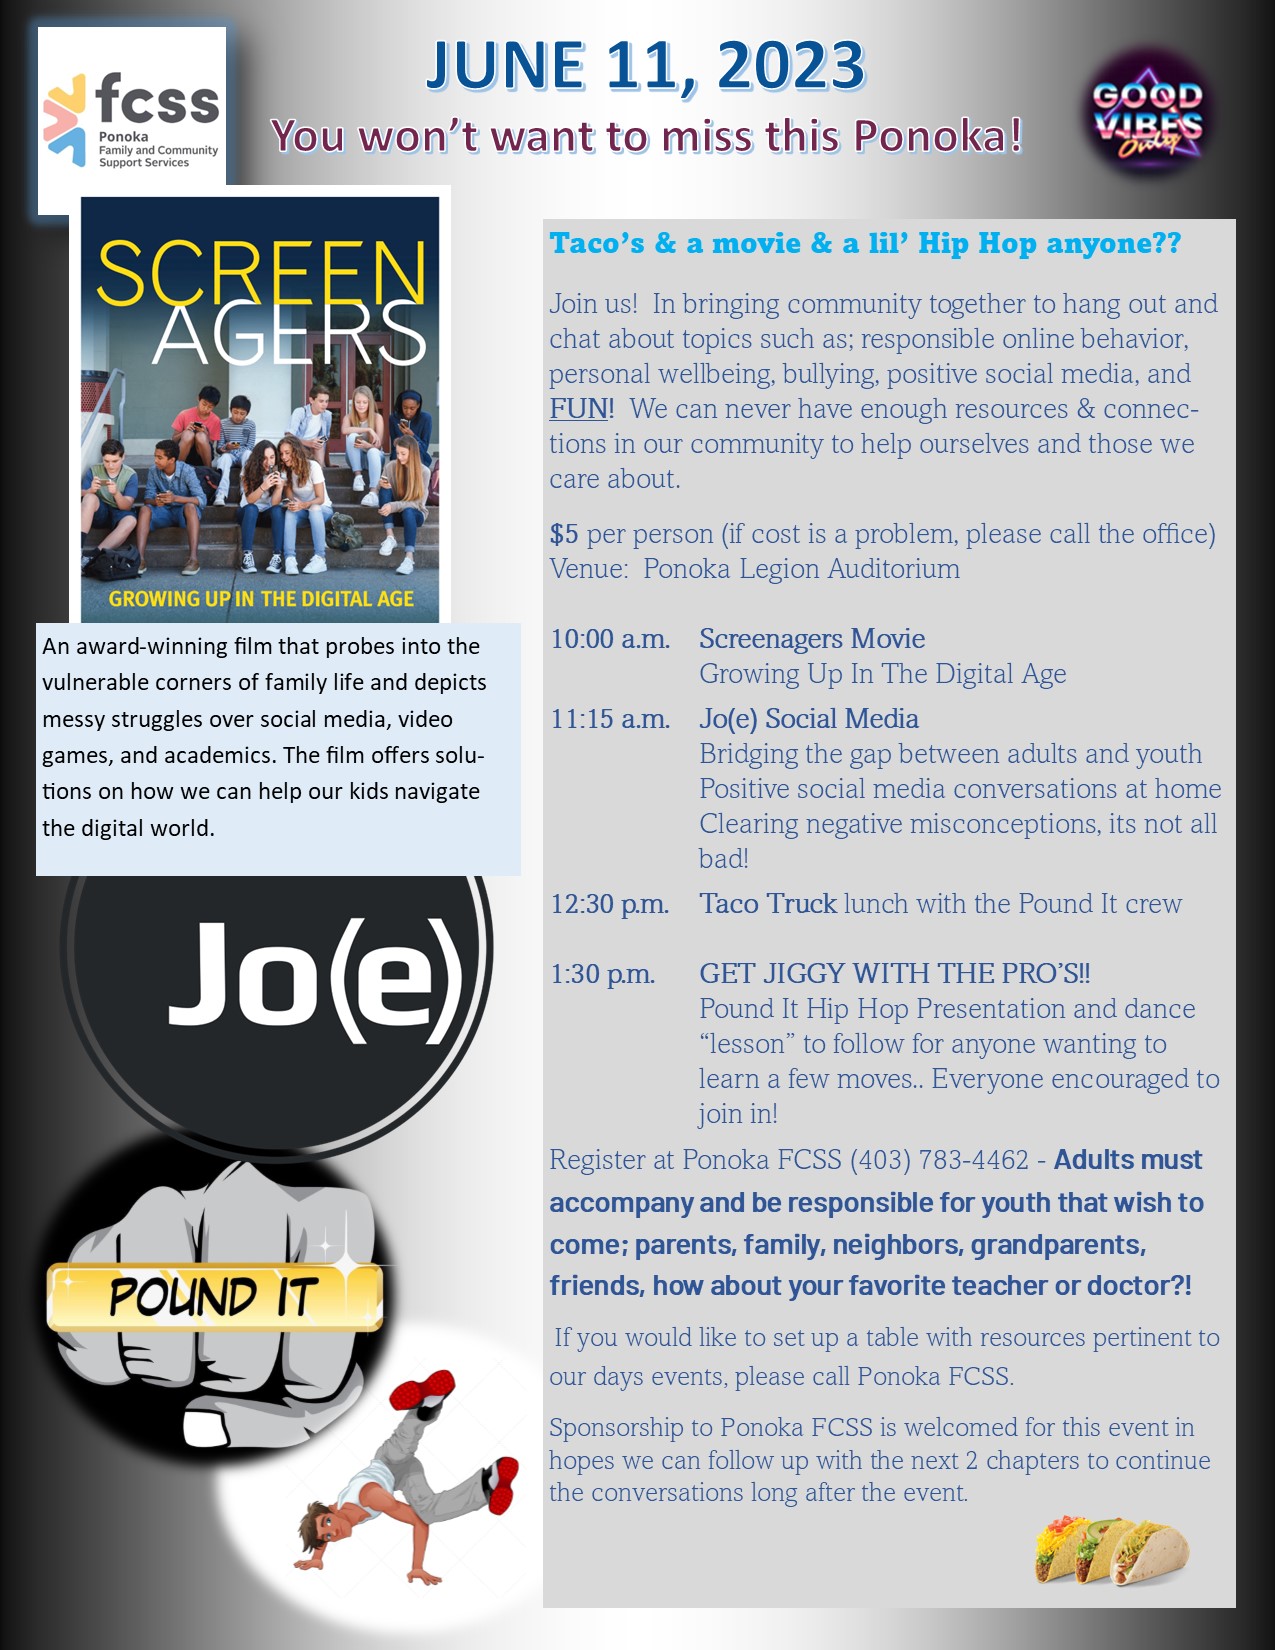 Screenagers June 11: Call FCSS Office at 403-783-4462 for information.